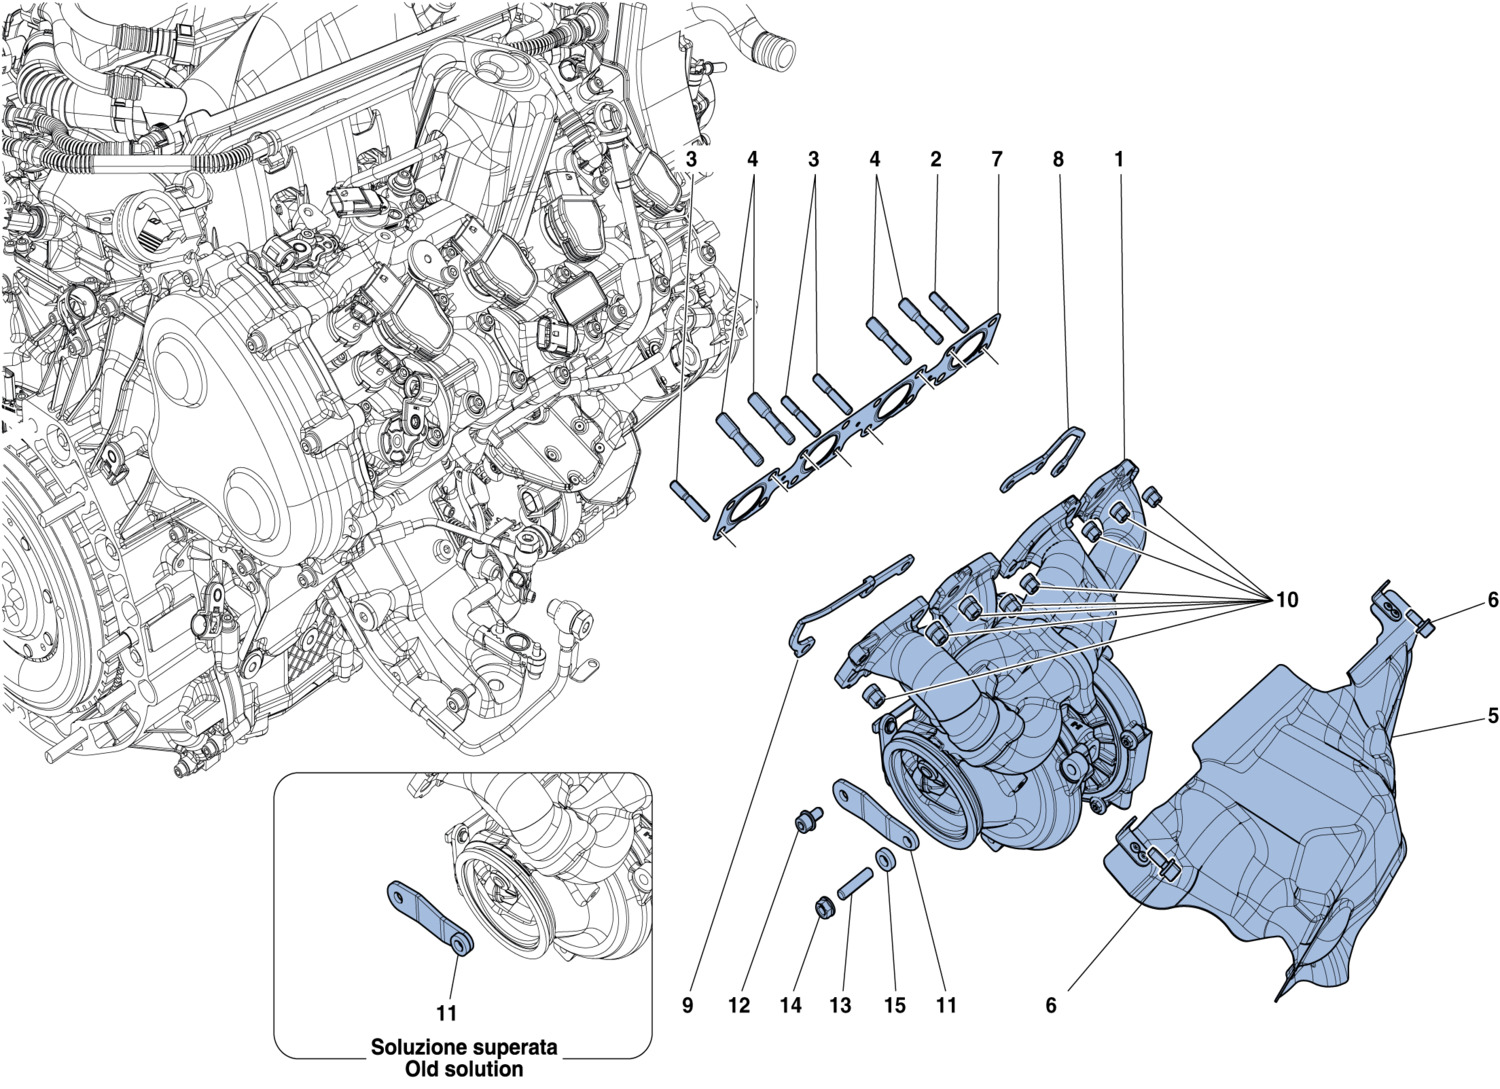 Schematic: Manifolds, Turbocharging System And Pipes